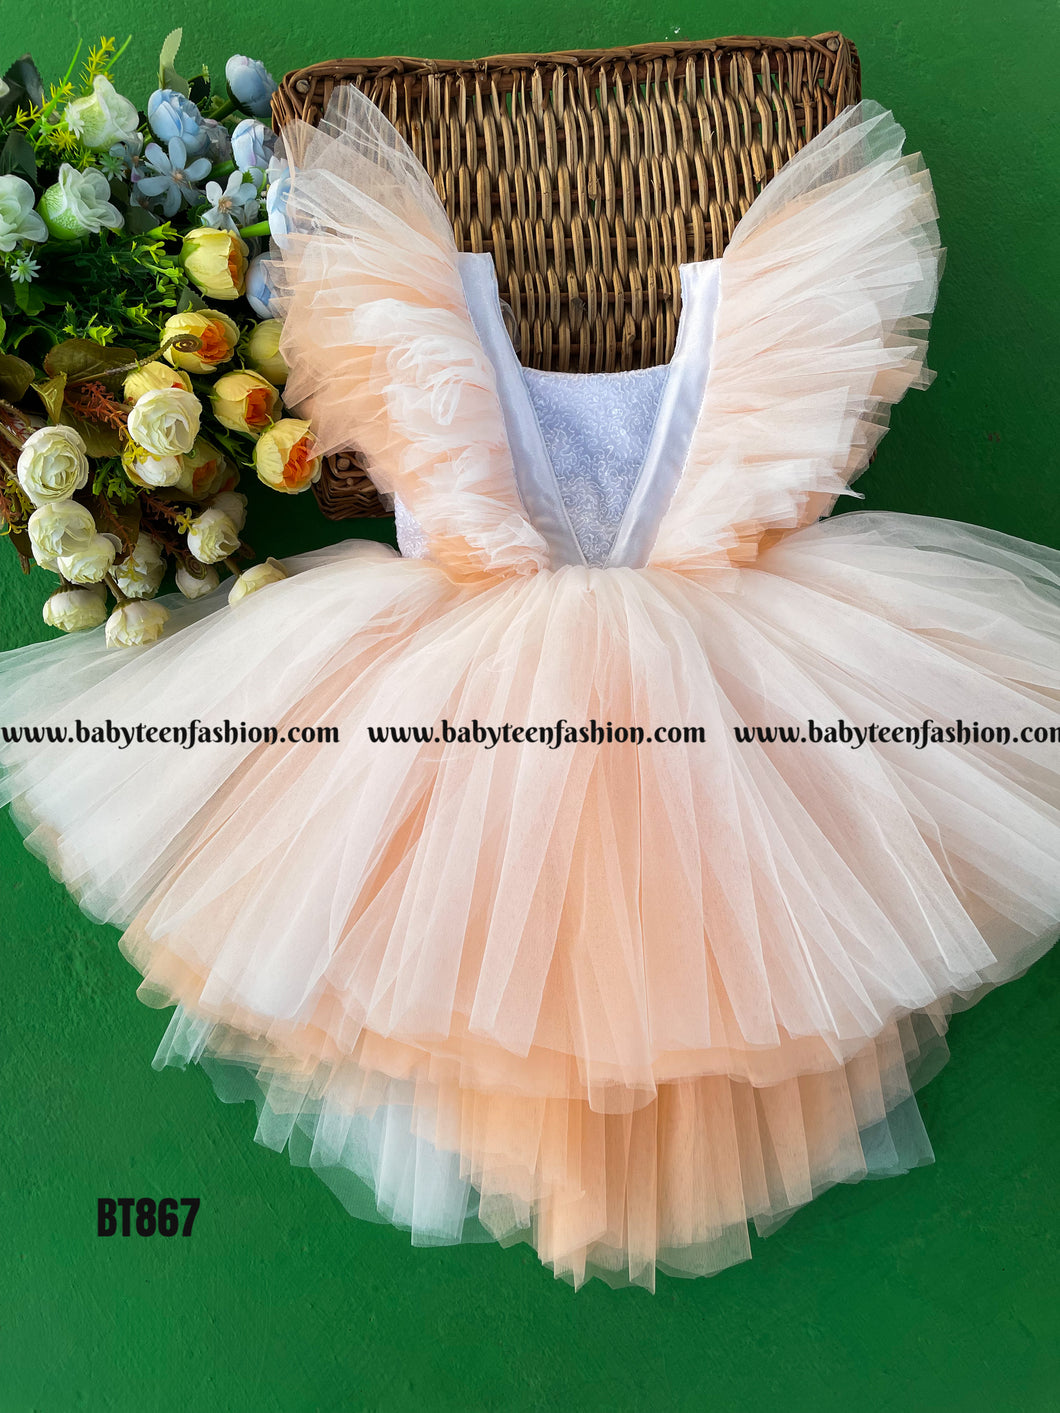 BT867 Sunkissed Peach Flutter Dress  Joy and Delicacy for Your Little Sunshine